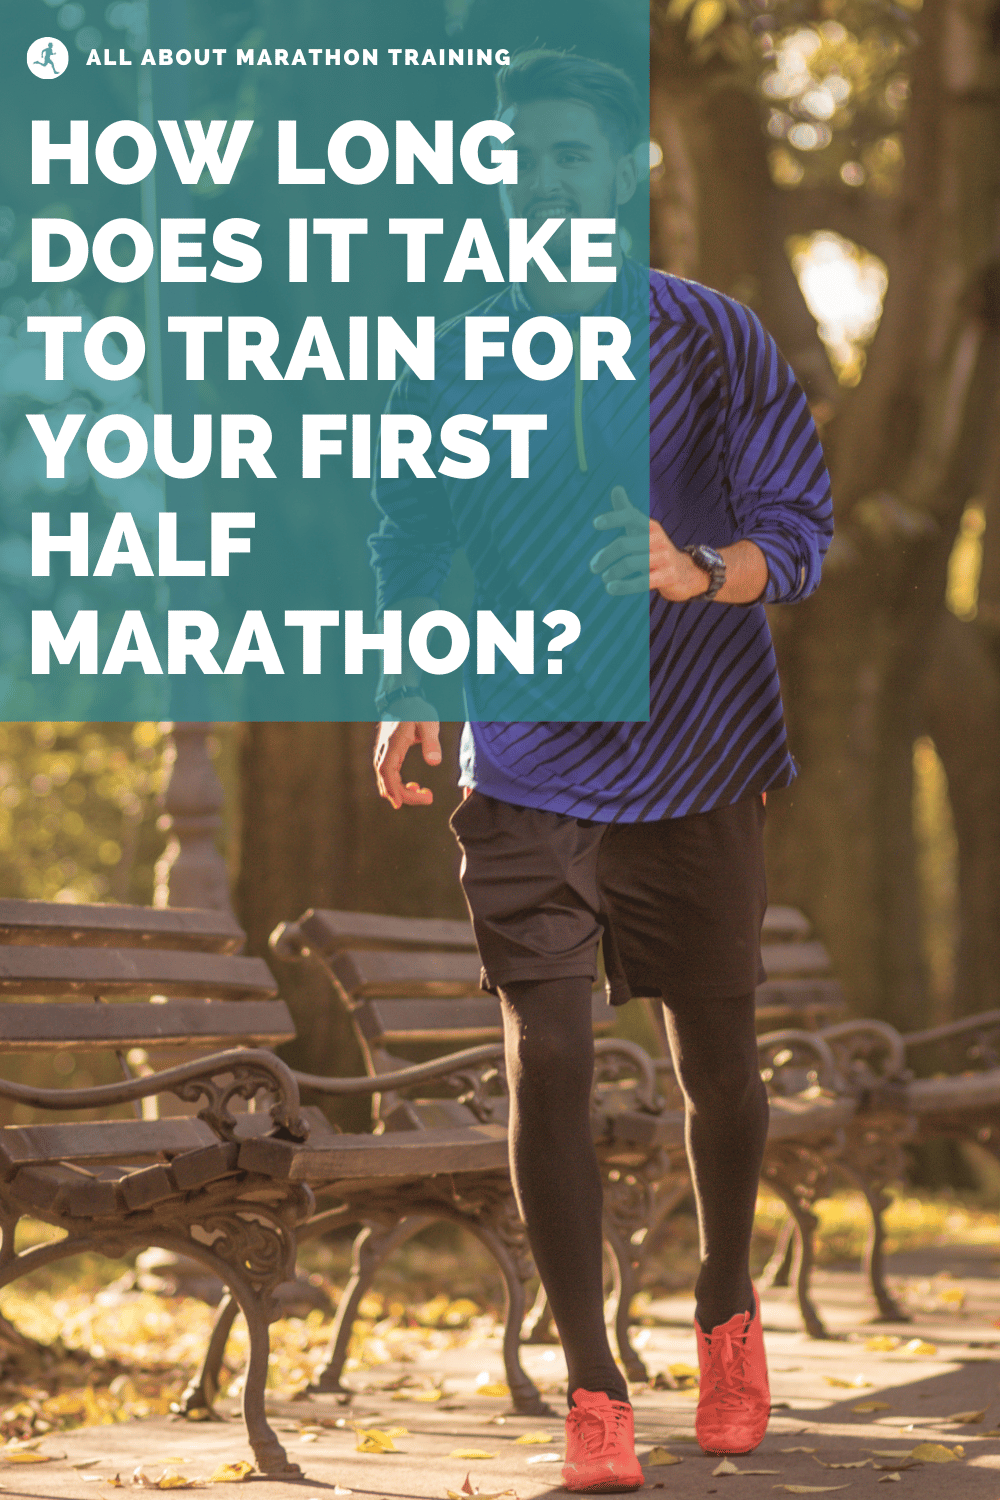 How Long Does It Take To Train For a Half Marathon